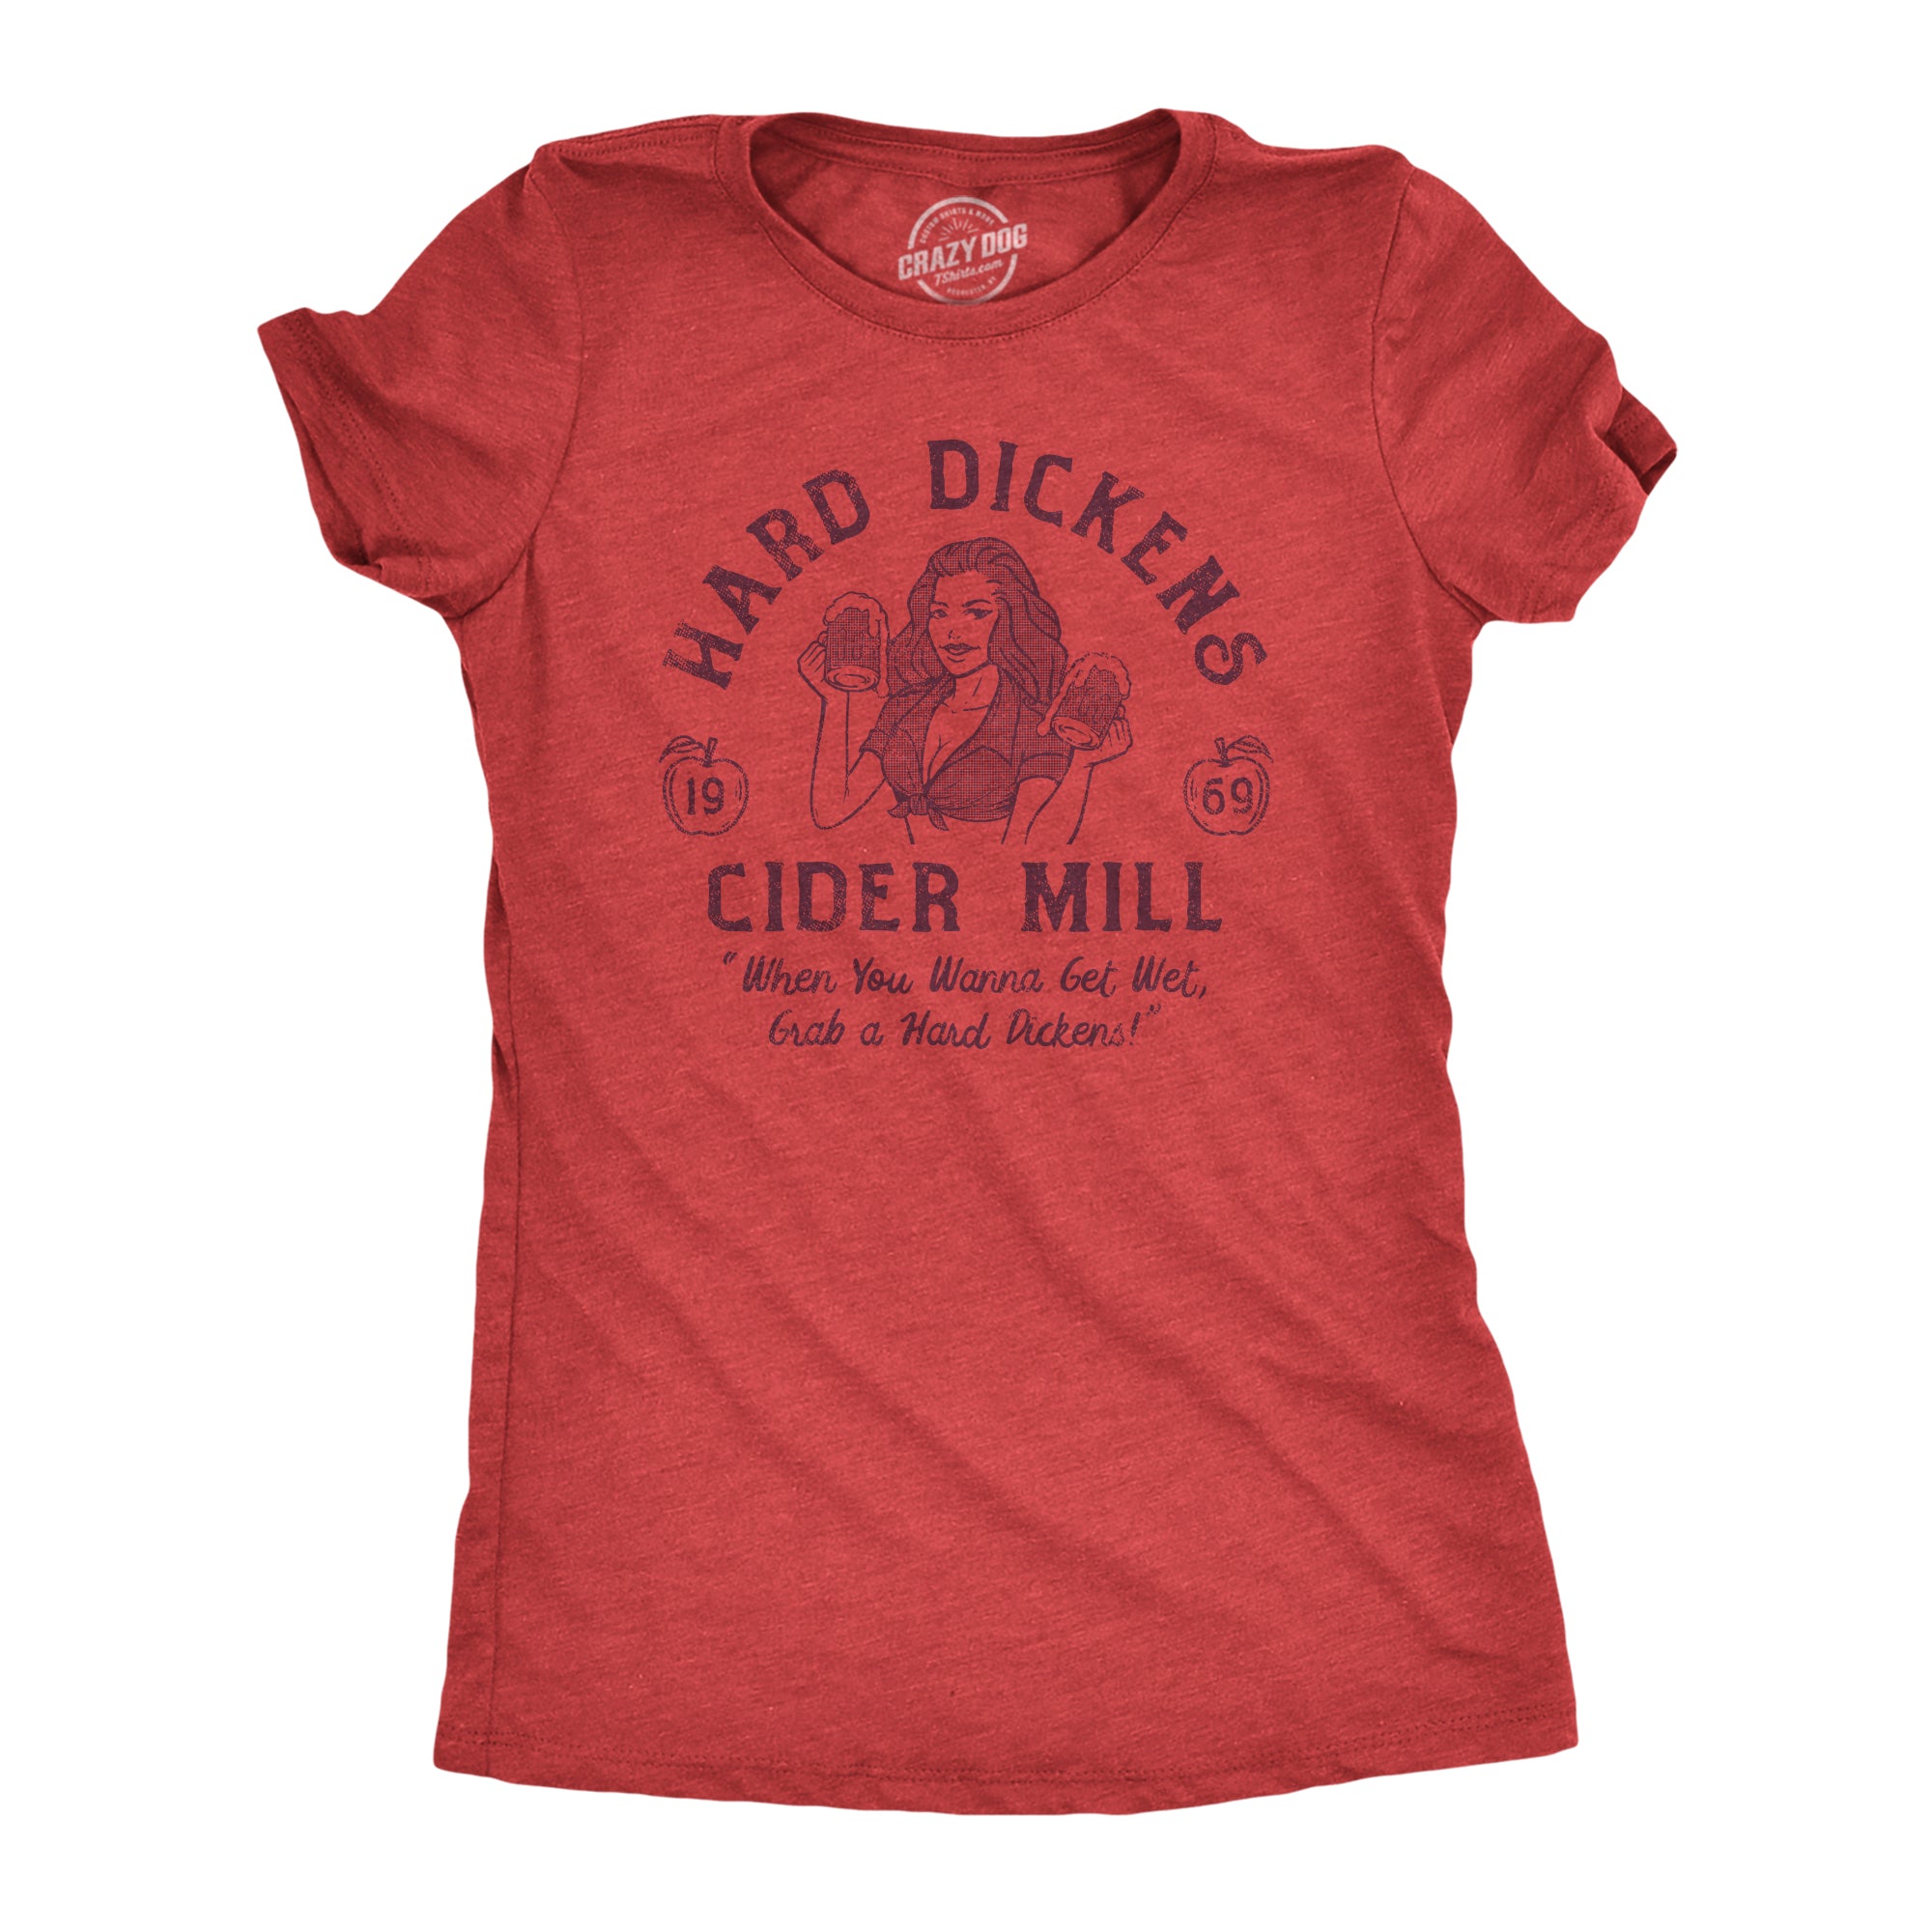 Funny Heather Red - Dickens Hard Dickens Cider Mill Womens T Shirt Nerdy Drinking Tee